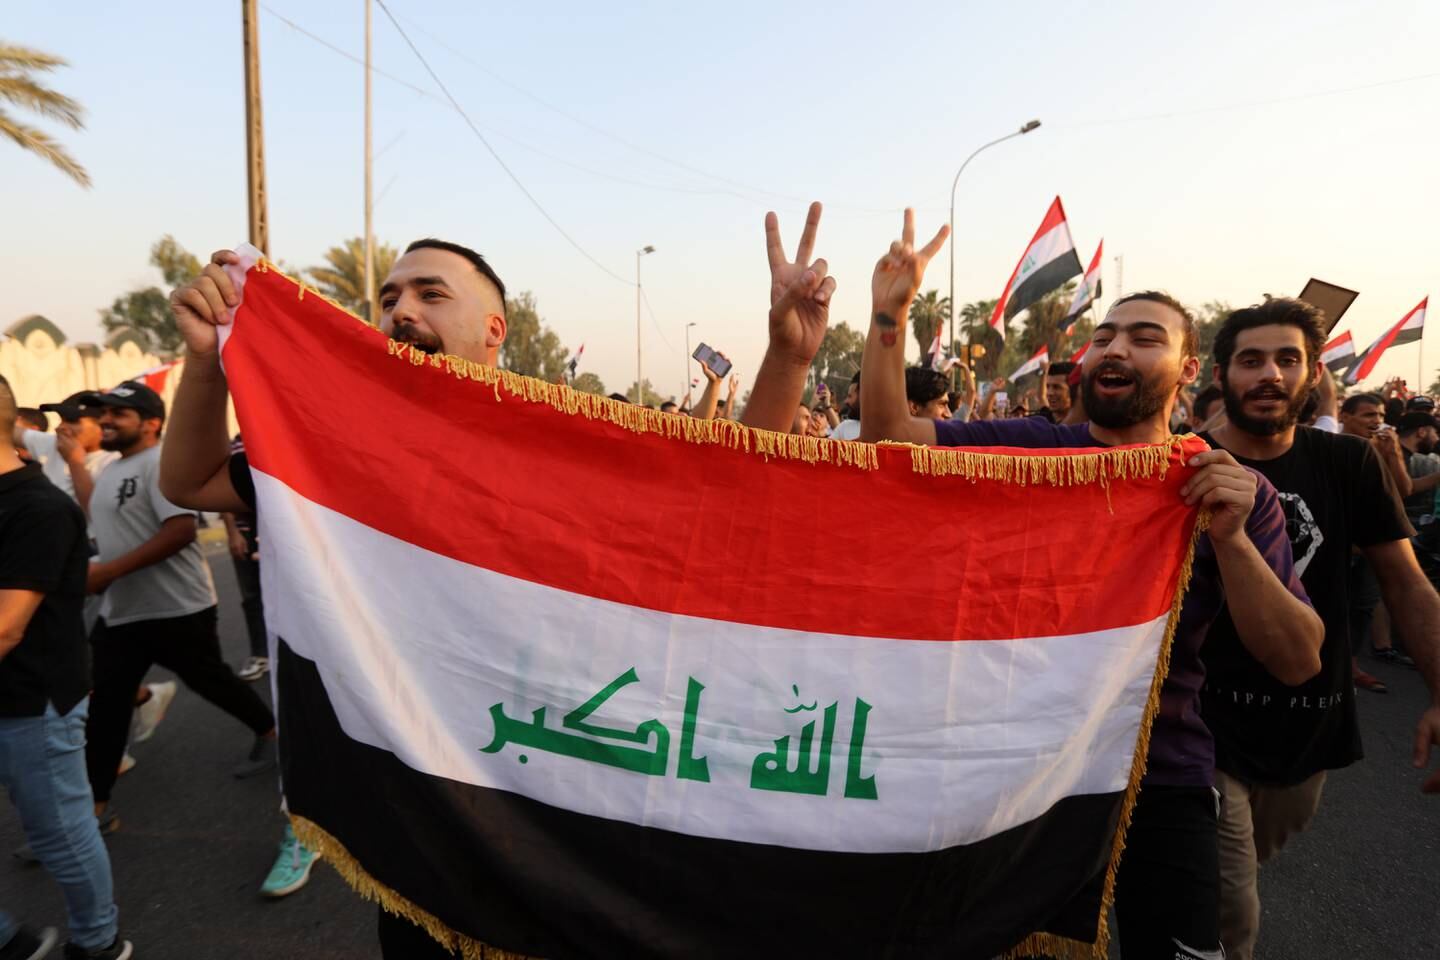 Iraqi protesters chant anti-government slogans and carry the Iraqi national flag during a protest near the Supreme Judicial Council building in central Baghdad, Iraq, on September 2. EPA